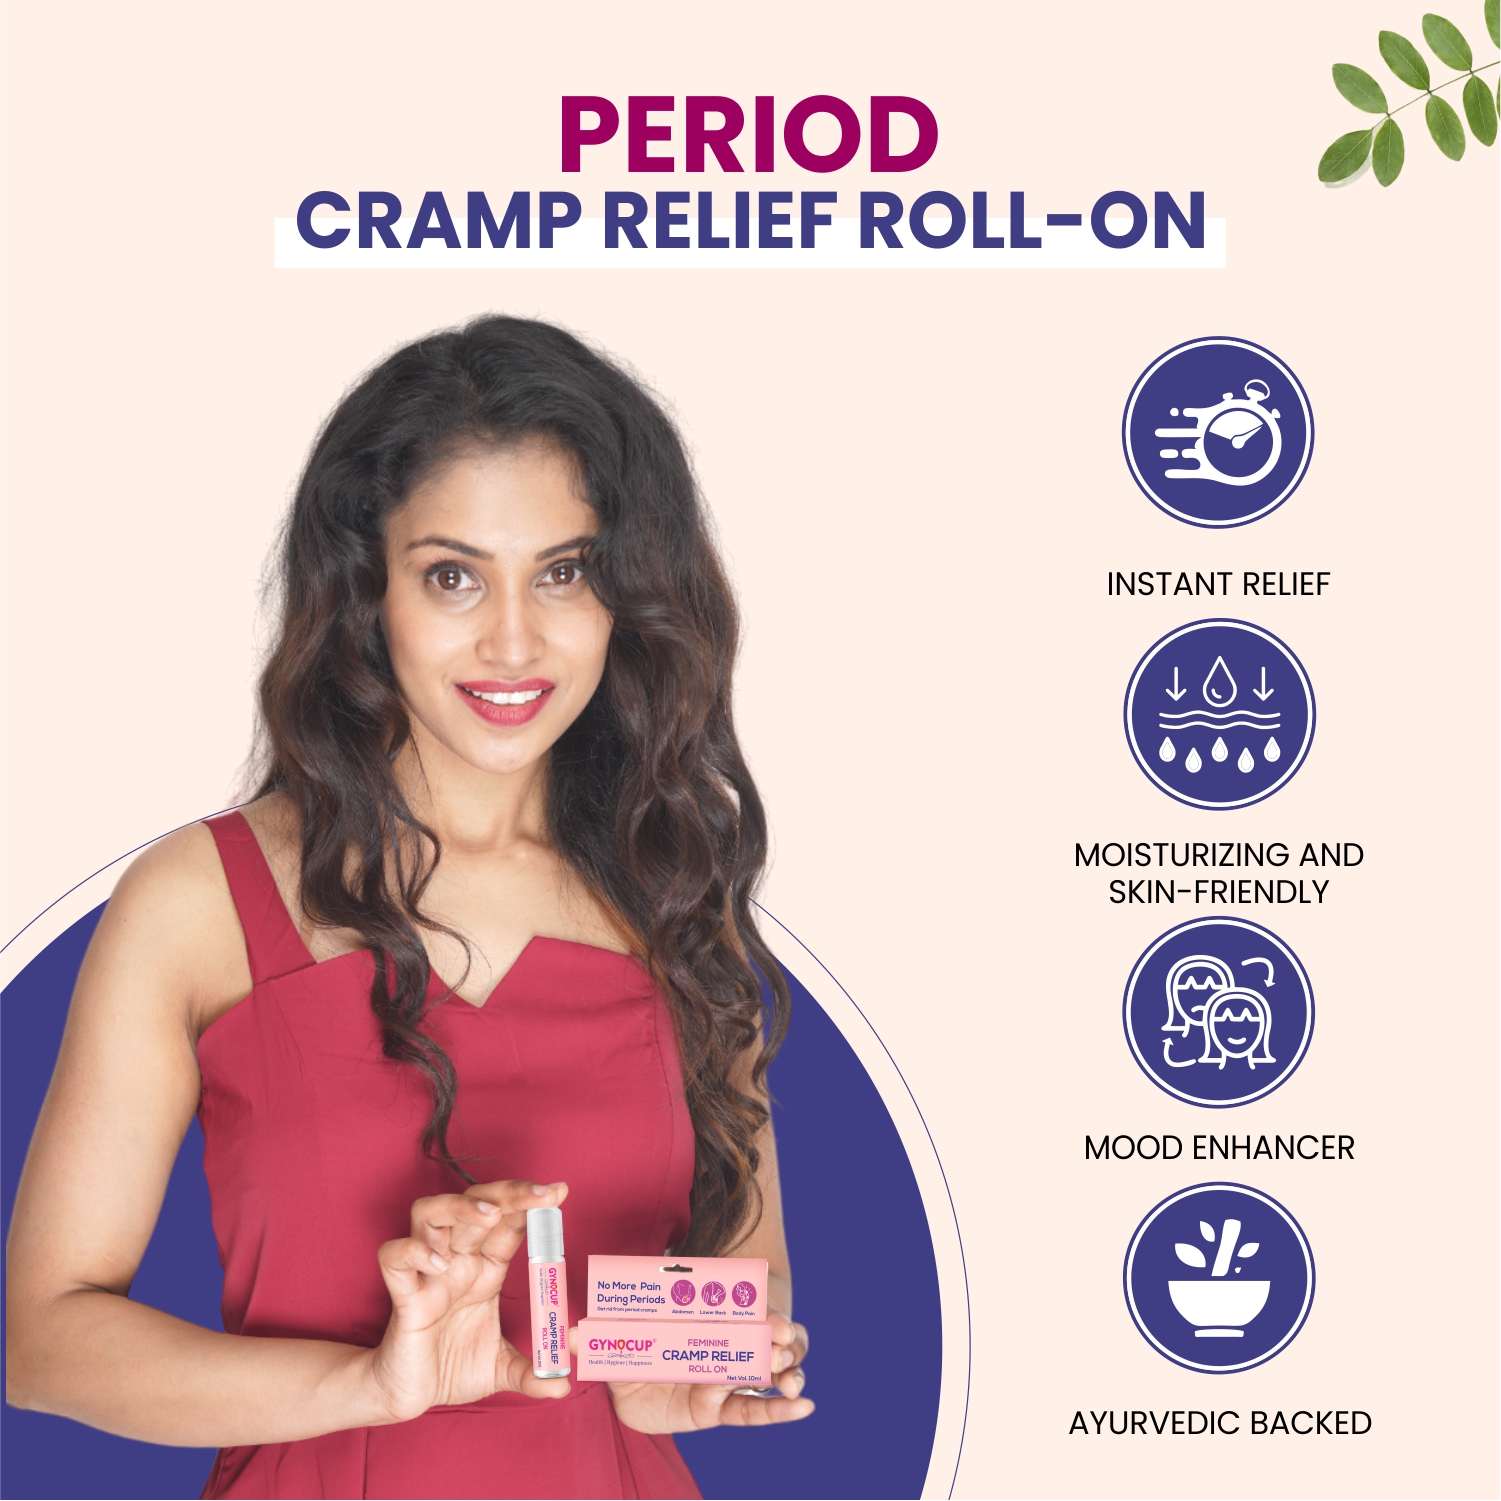 GynoCup Feminine Cramp Relief Roll On All In One (Periods, Lower Back Pain & Body Pain)